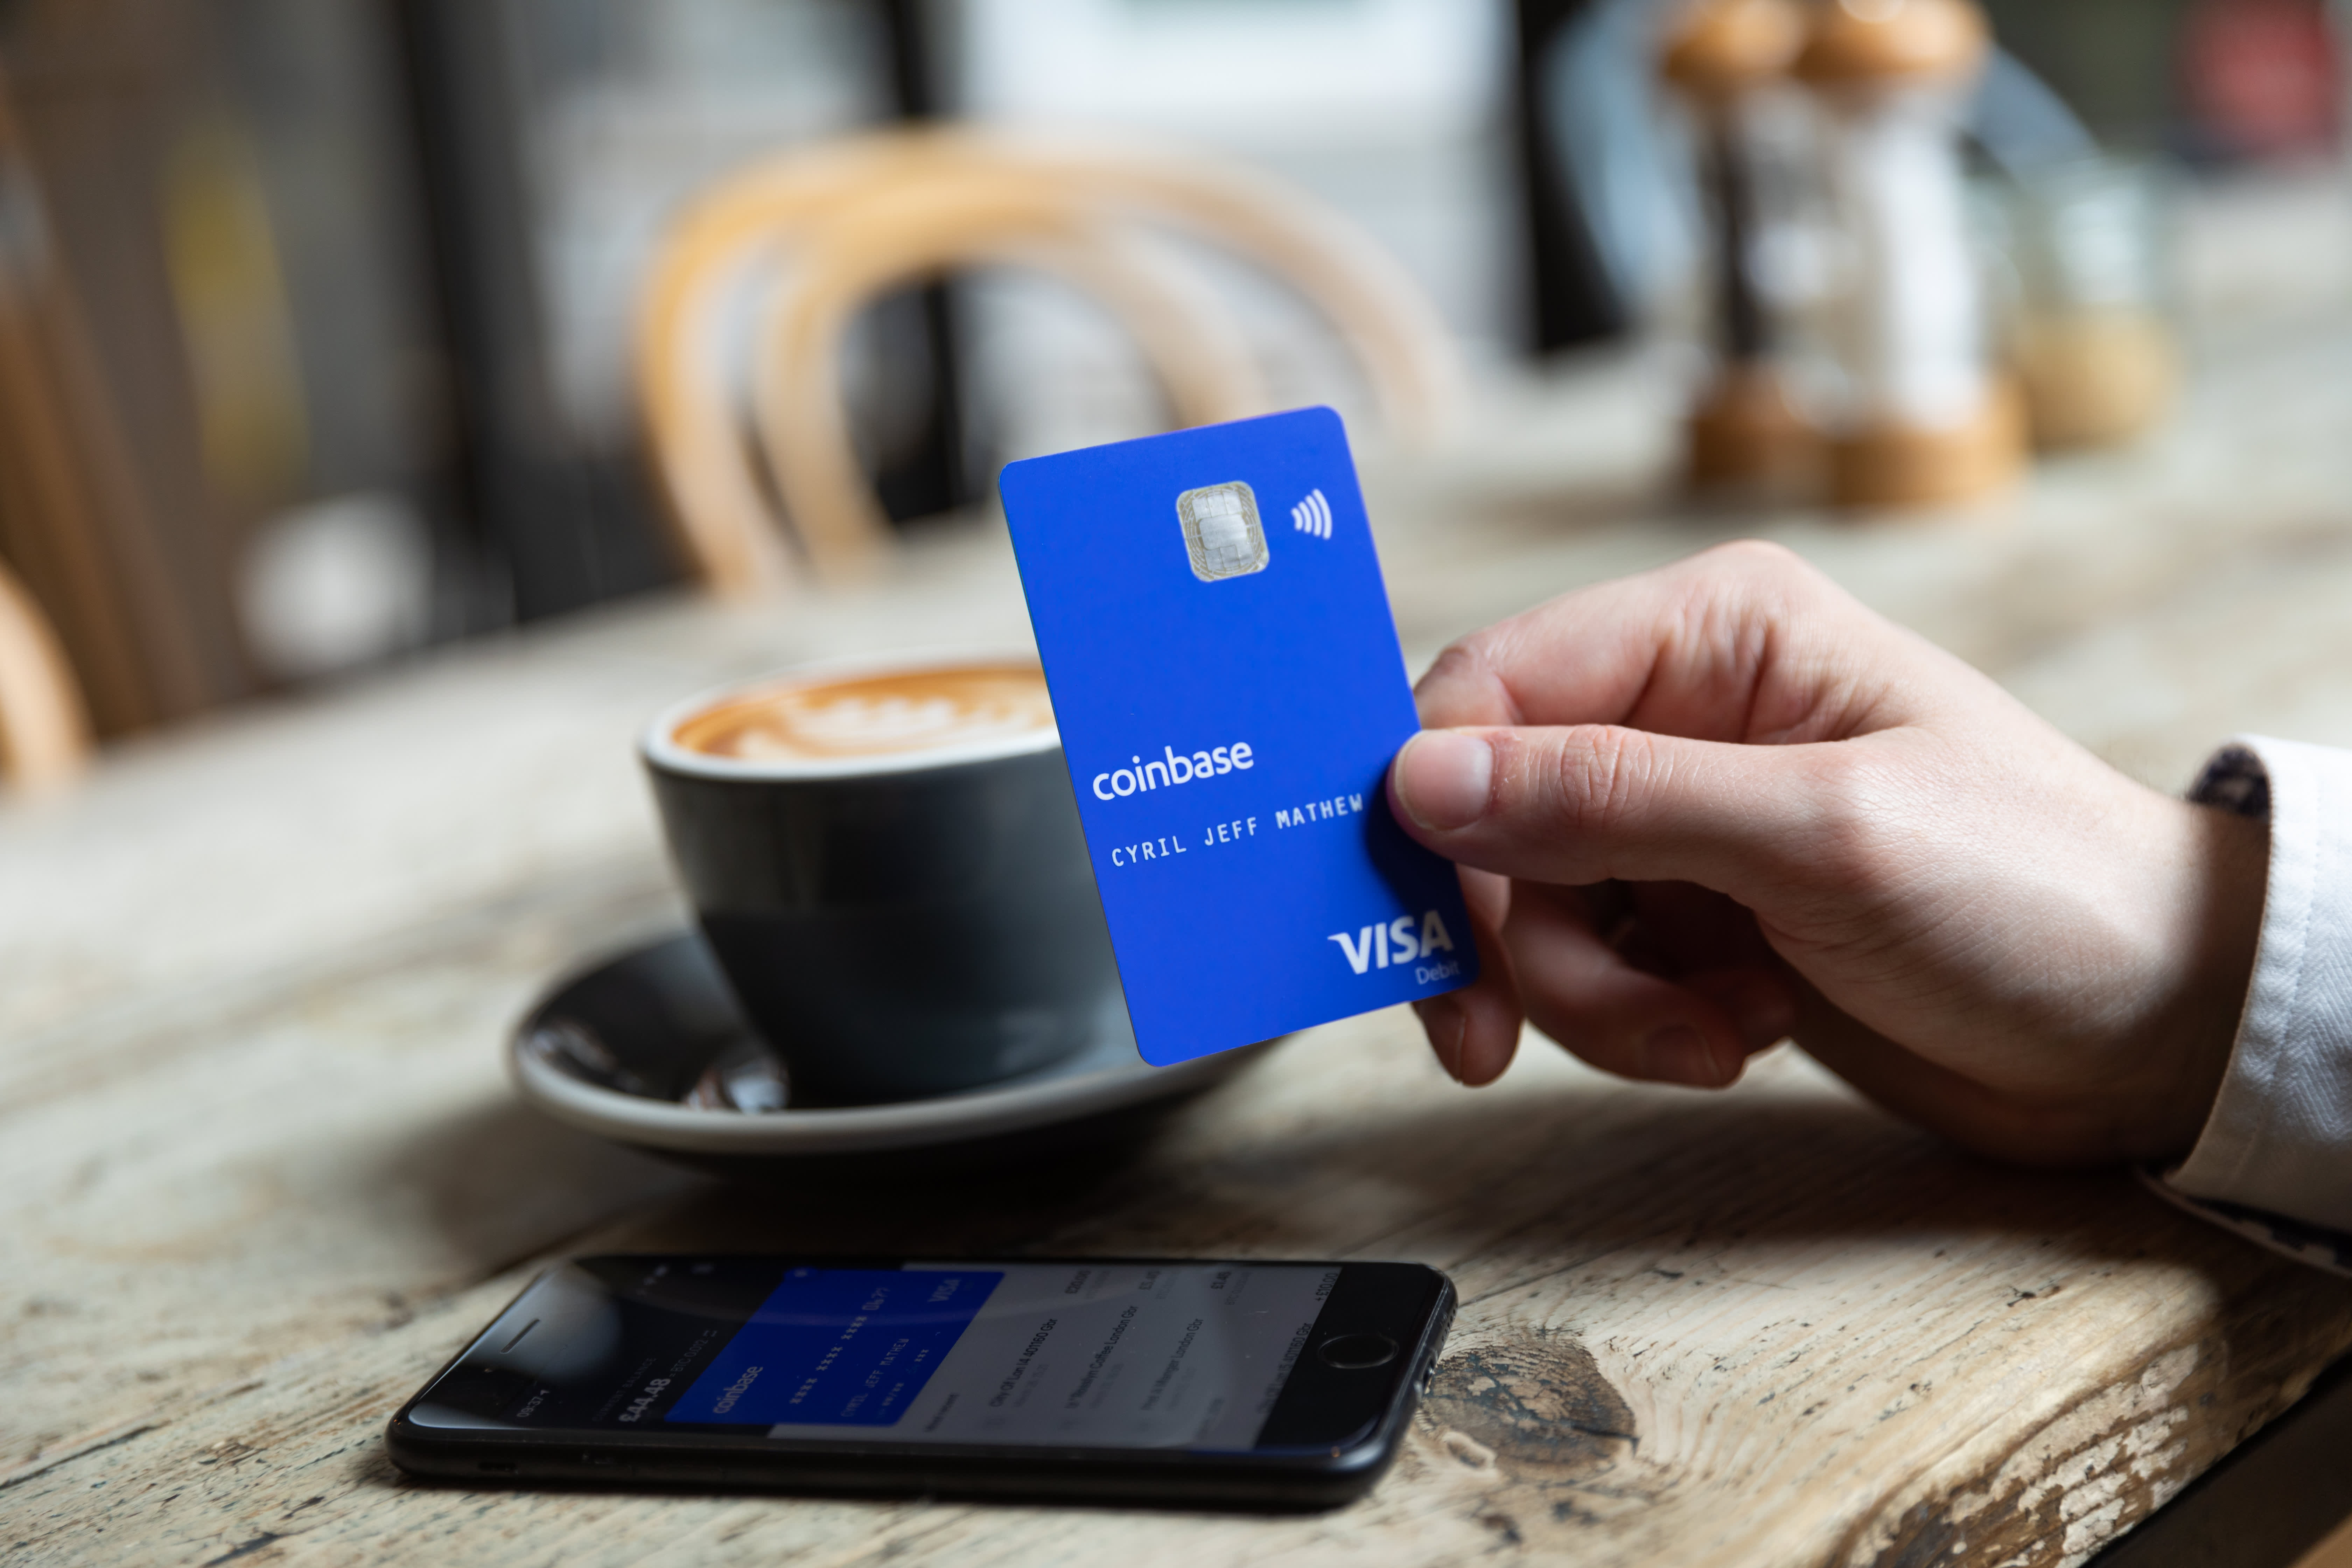 Coinbase launches its cryptocurrency Visa debit card in the US - The Verge